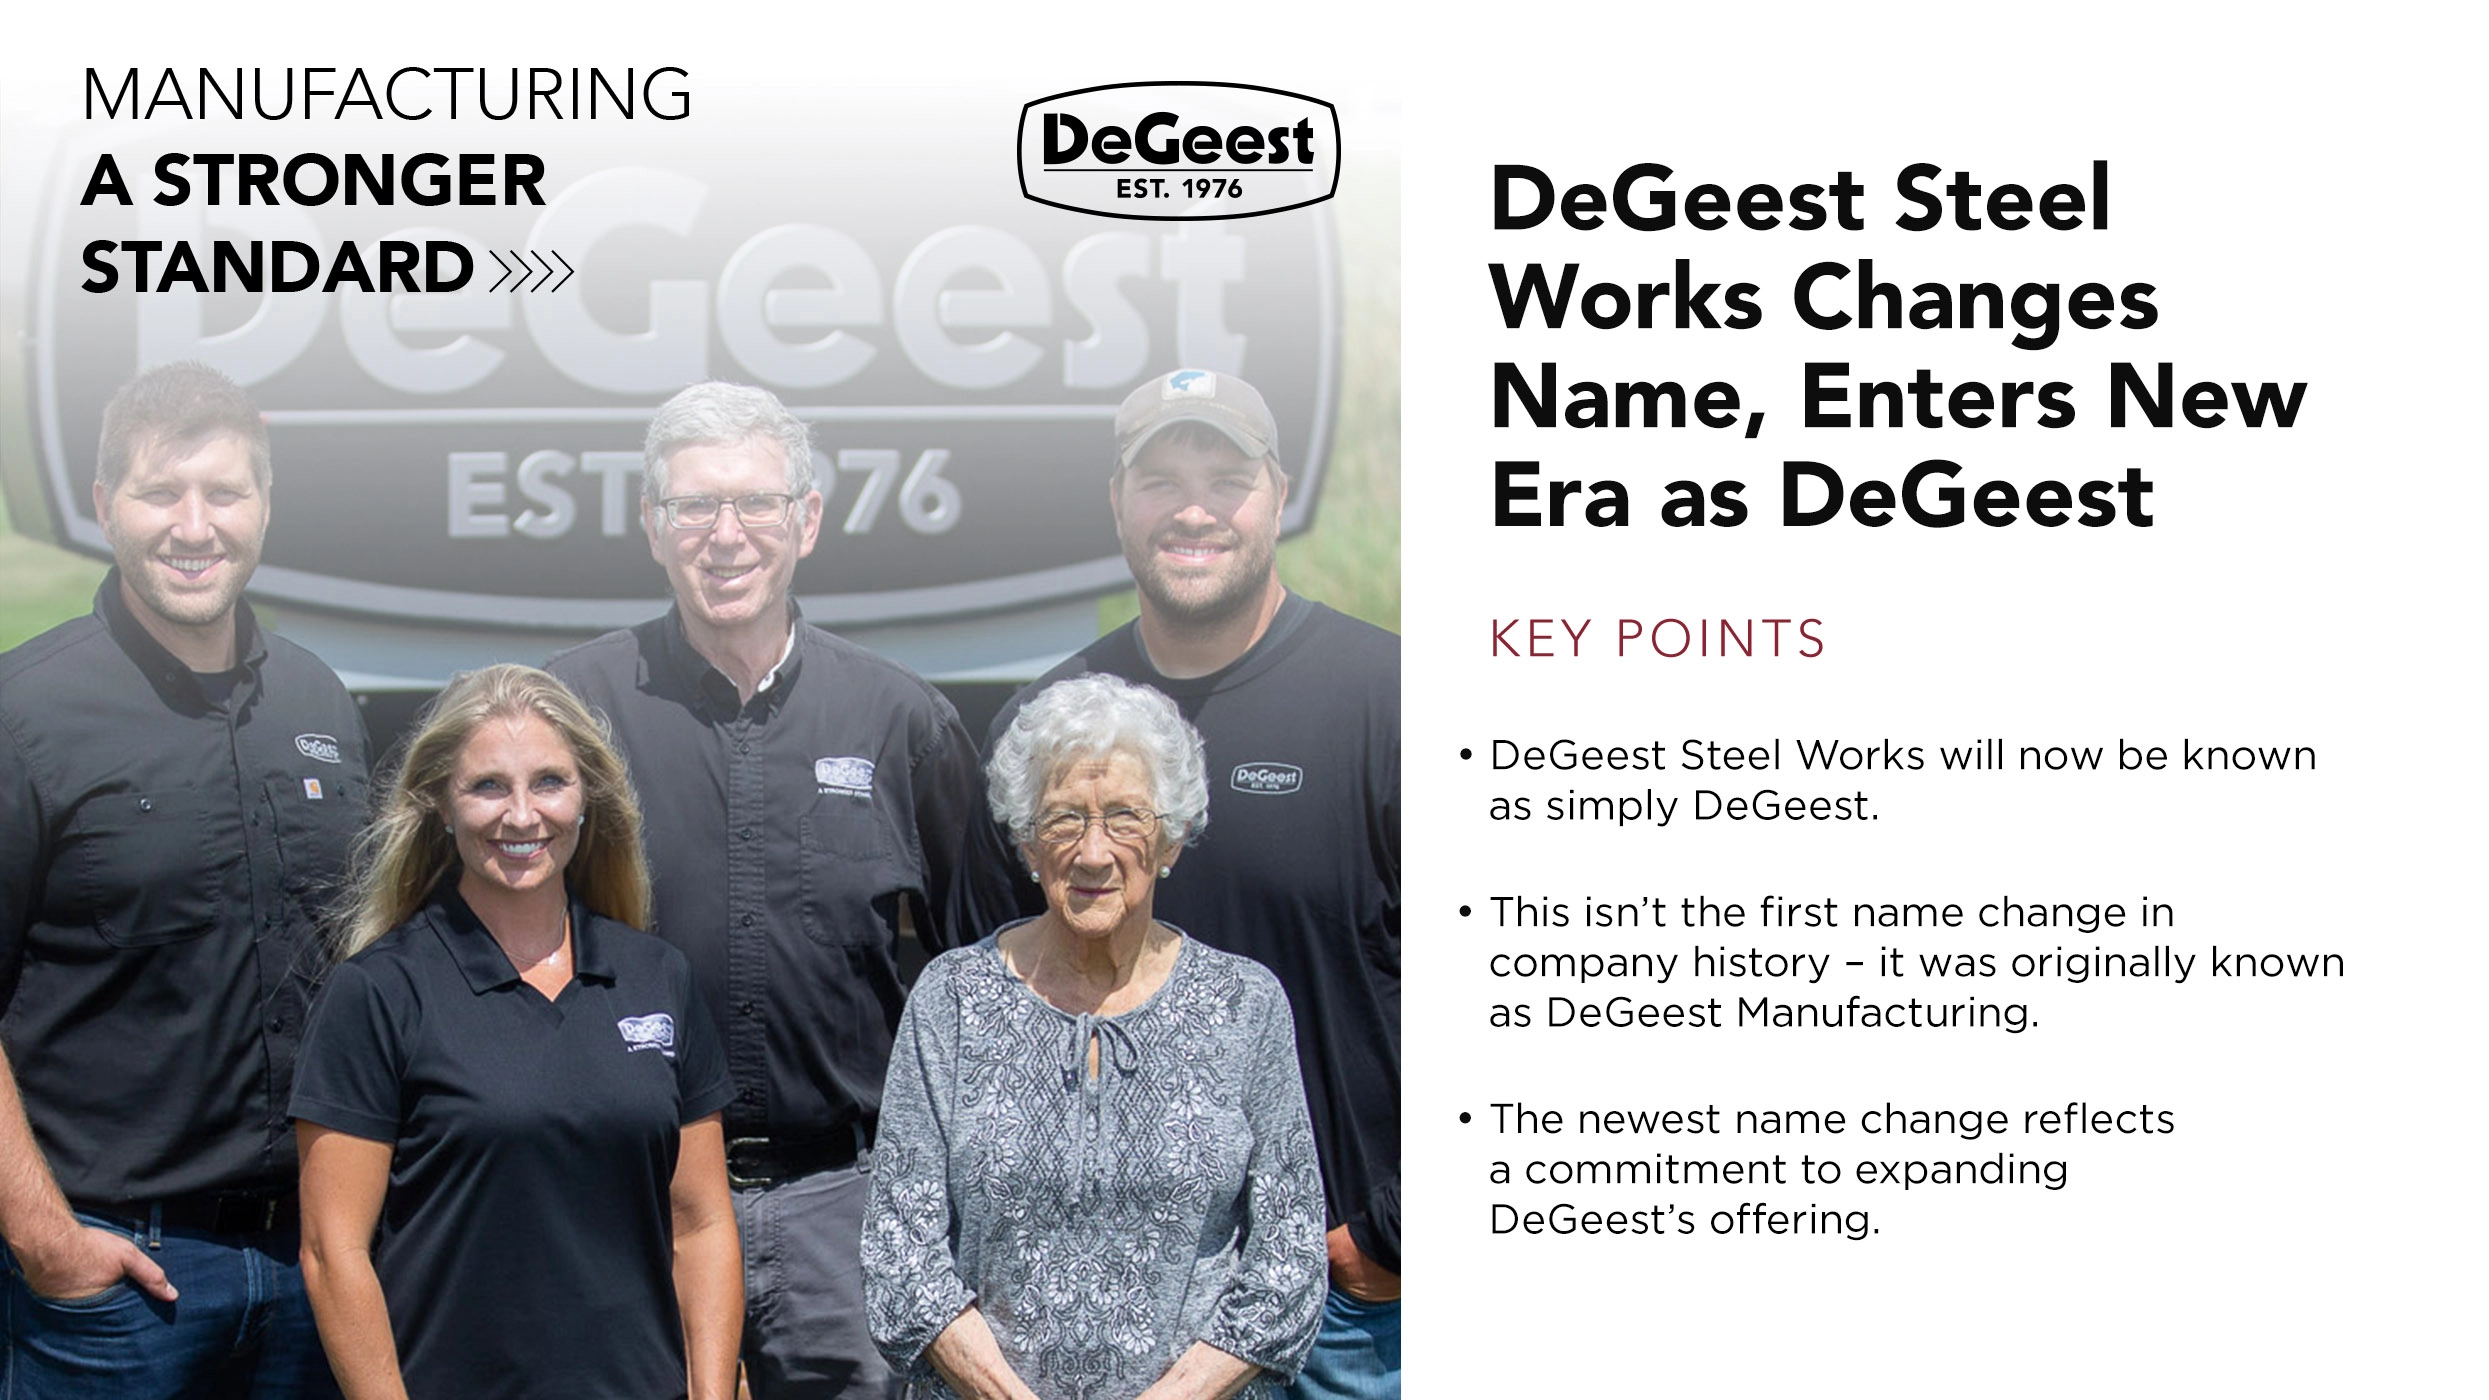 DeGeest Steel Works Changes Name, Enters New Era as DeGeest